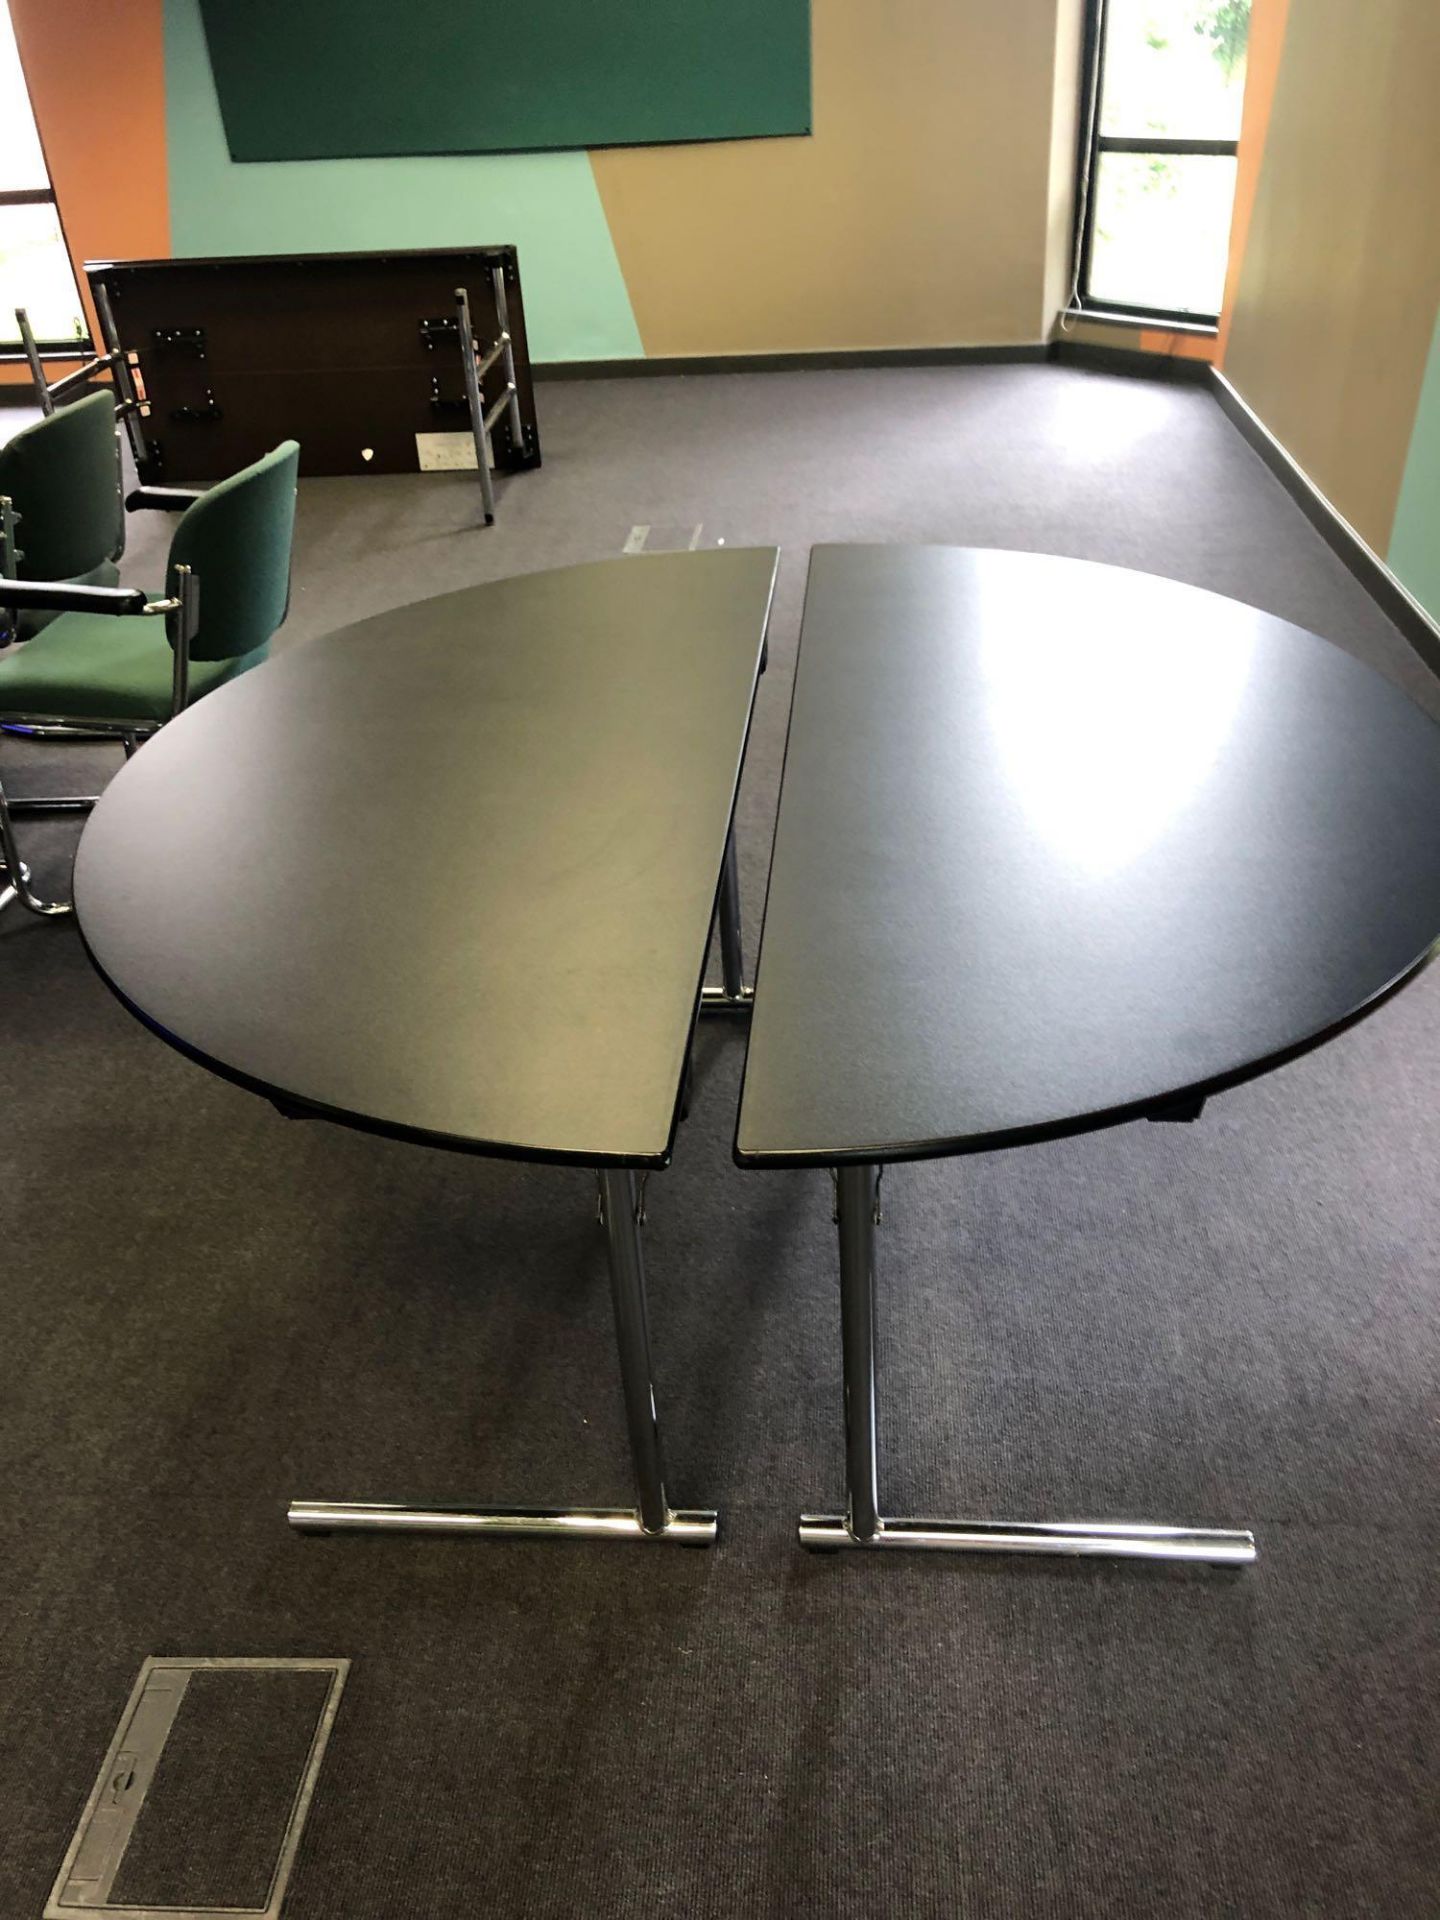 5x Burgess Furnitures Black And Chrome Conference Half Circle Tables 1500 x 750 Mm